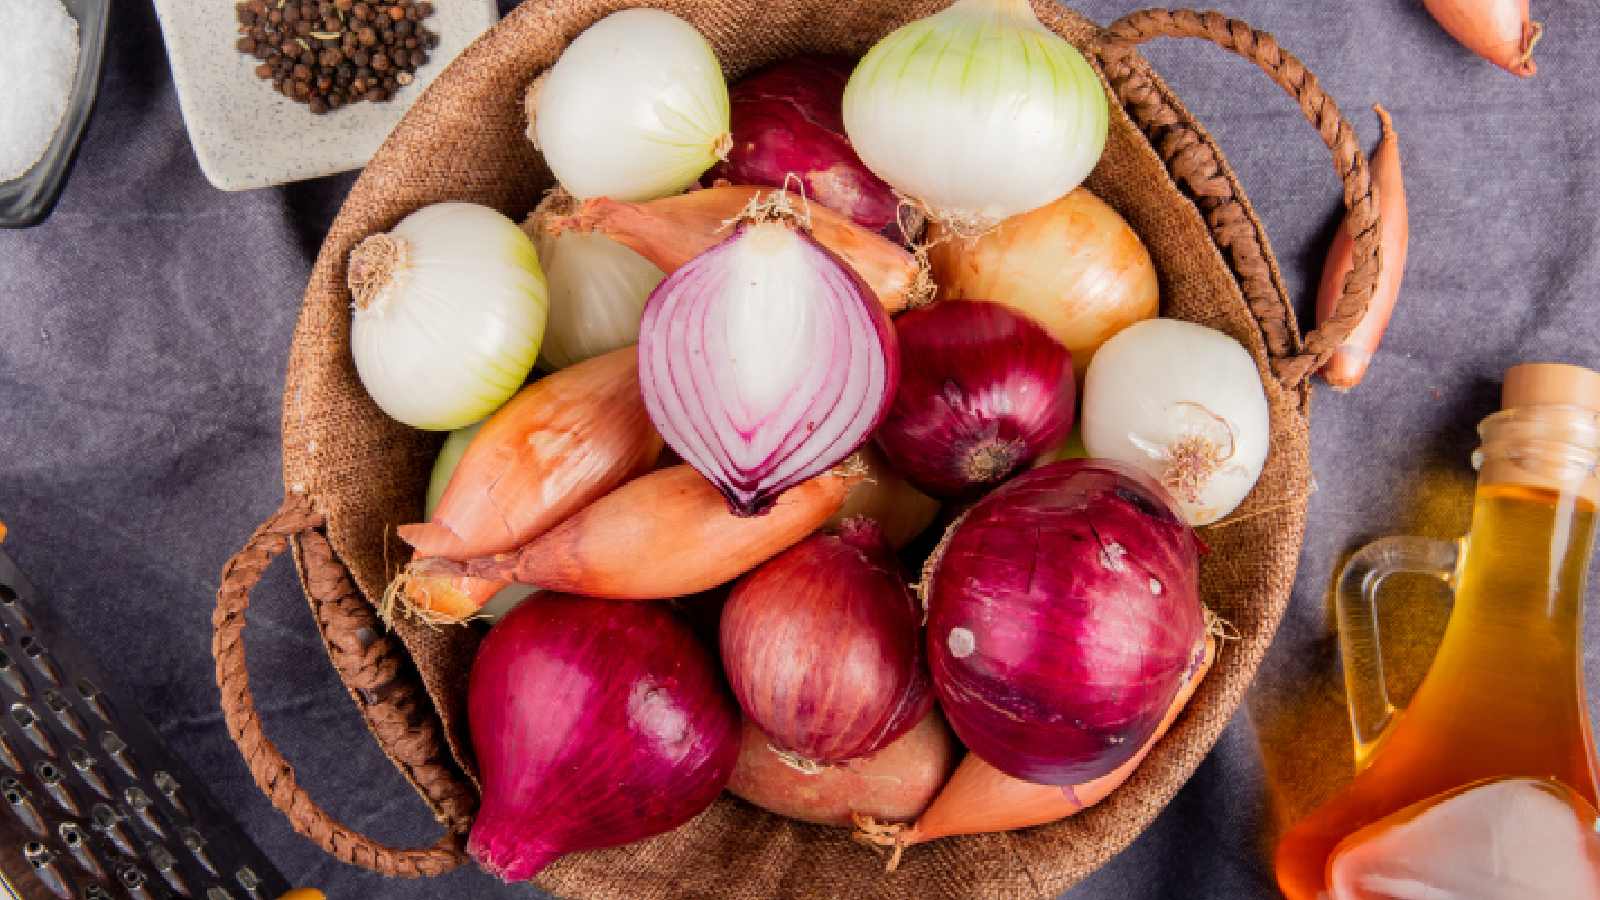 Onion or garlic: What is the best home remedy for hair growth?